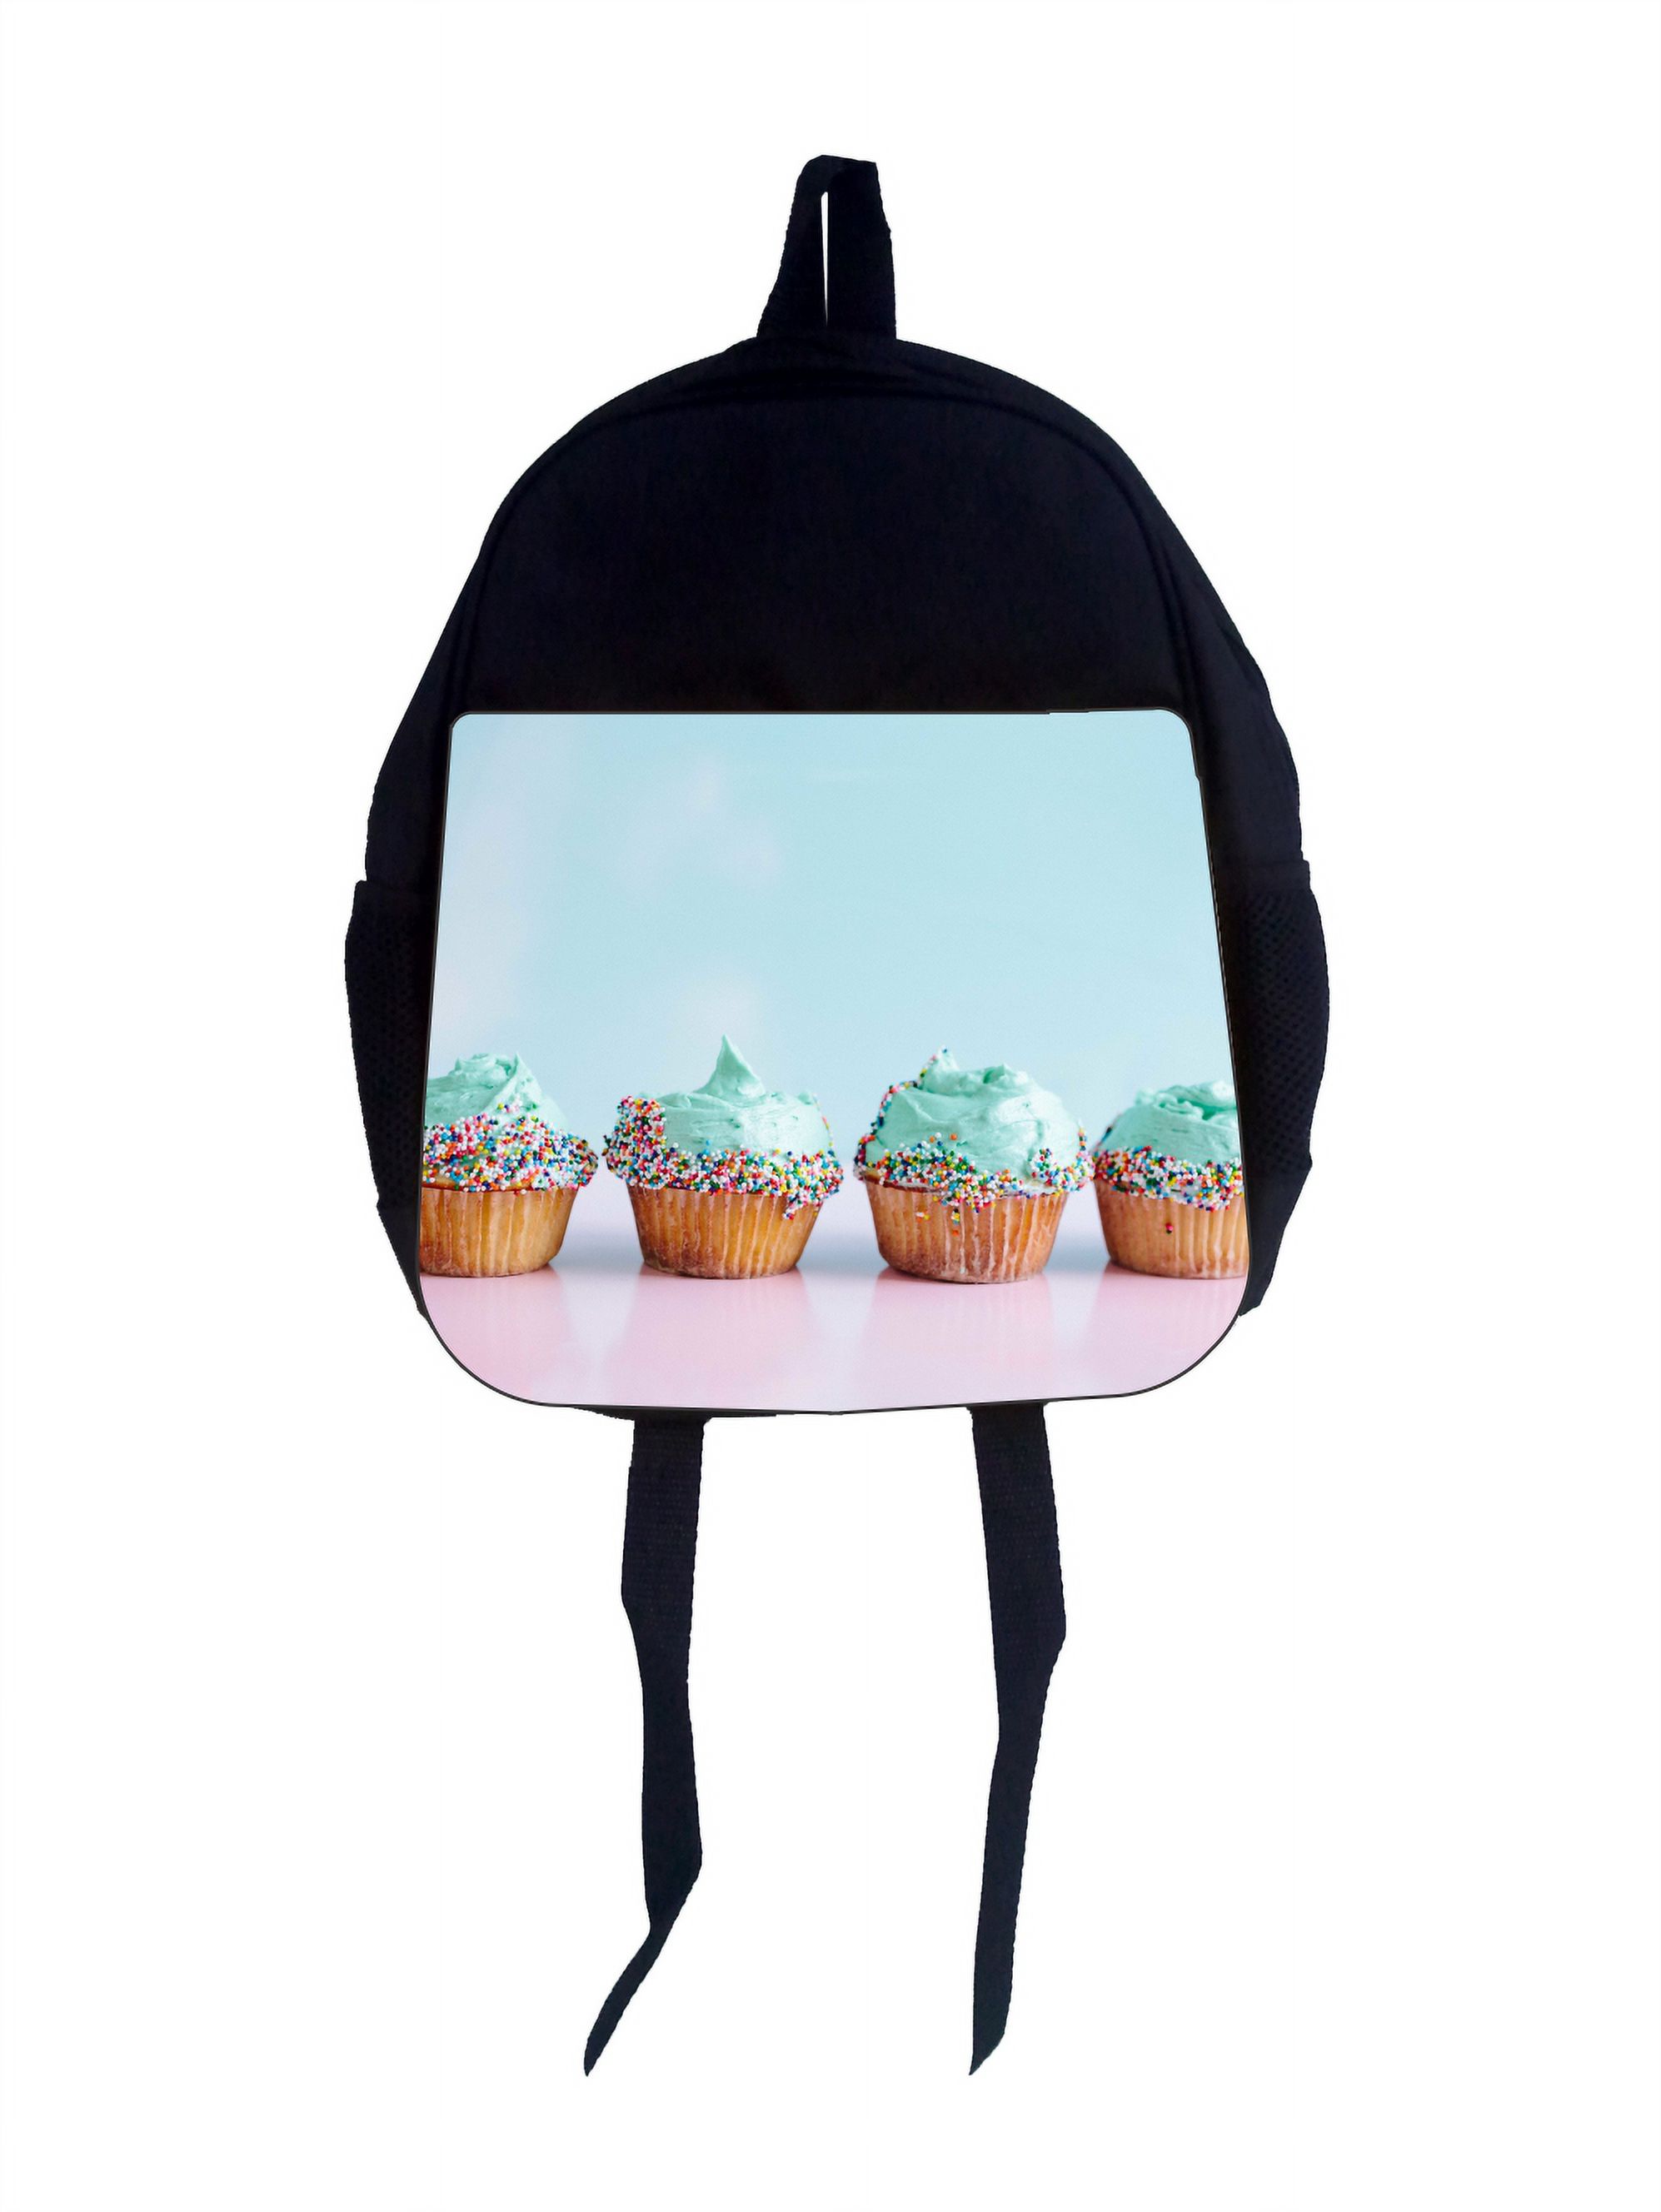 Pastel Confetti Cupcake Pastry Confections - Girls 13" x 10" Black Preschool Toddler Children's Backpack - image 1 of 2